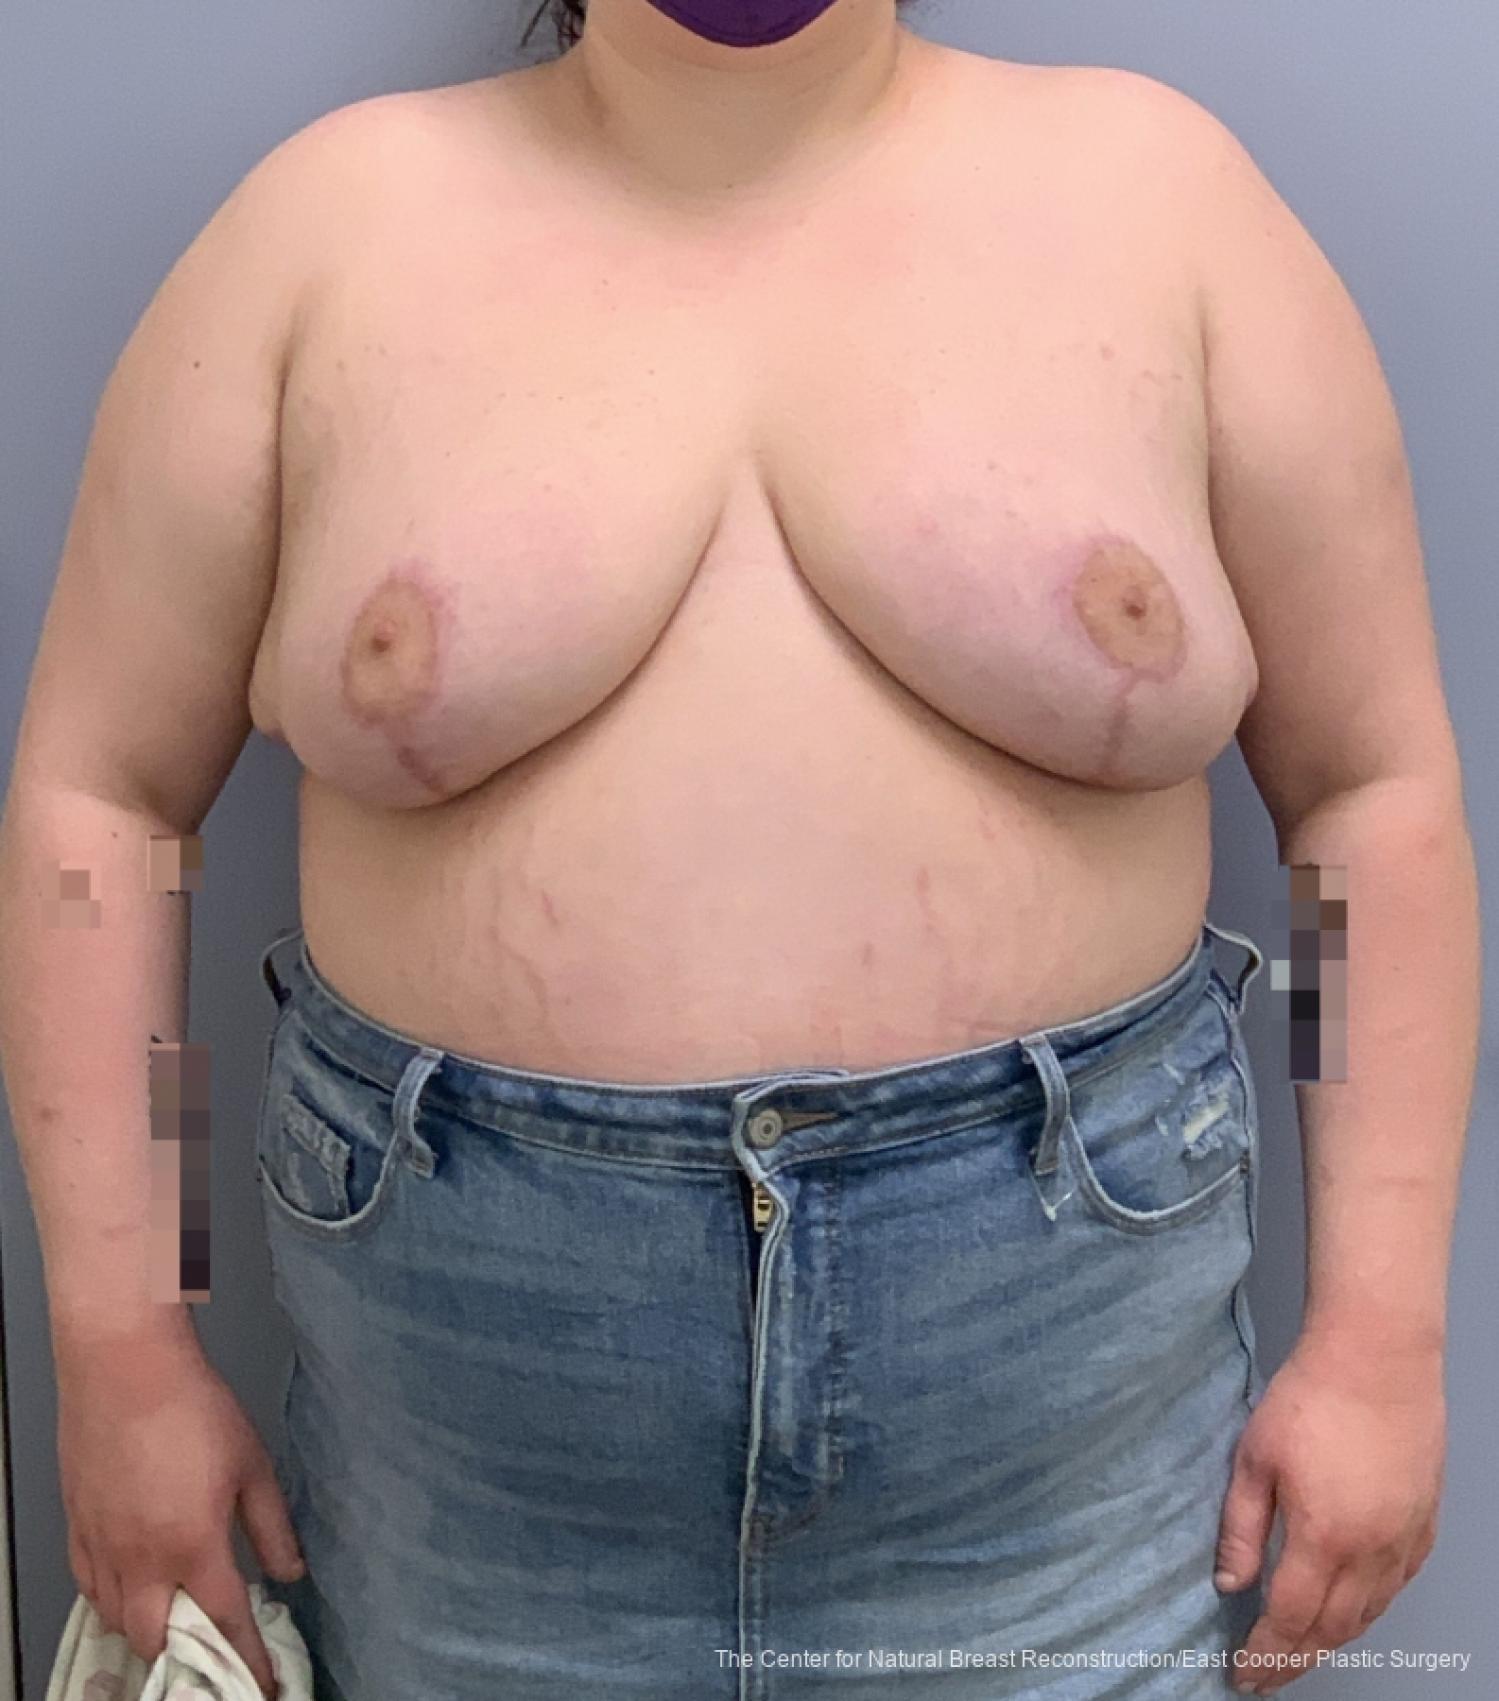 Breast Reduction: Patient 2 - After  